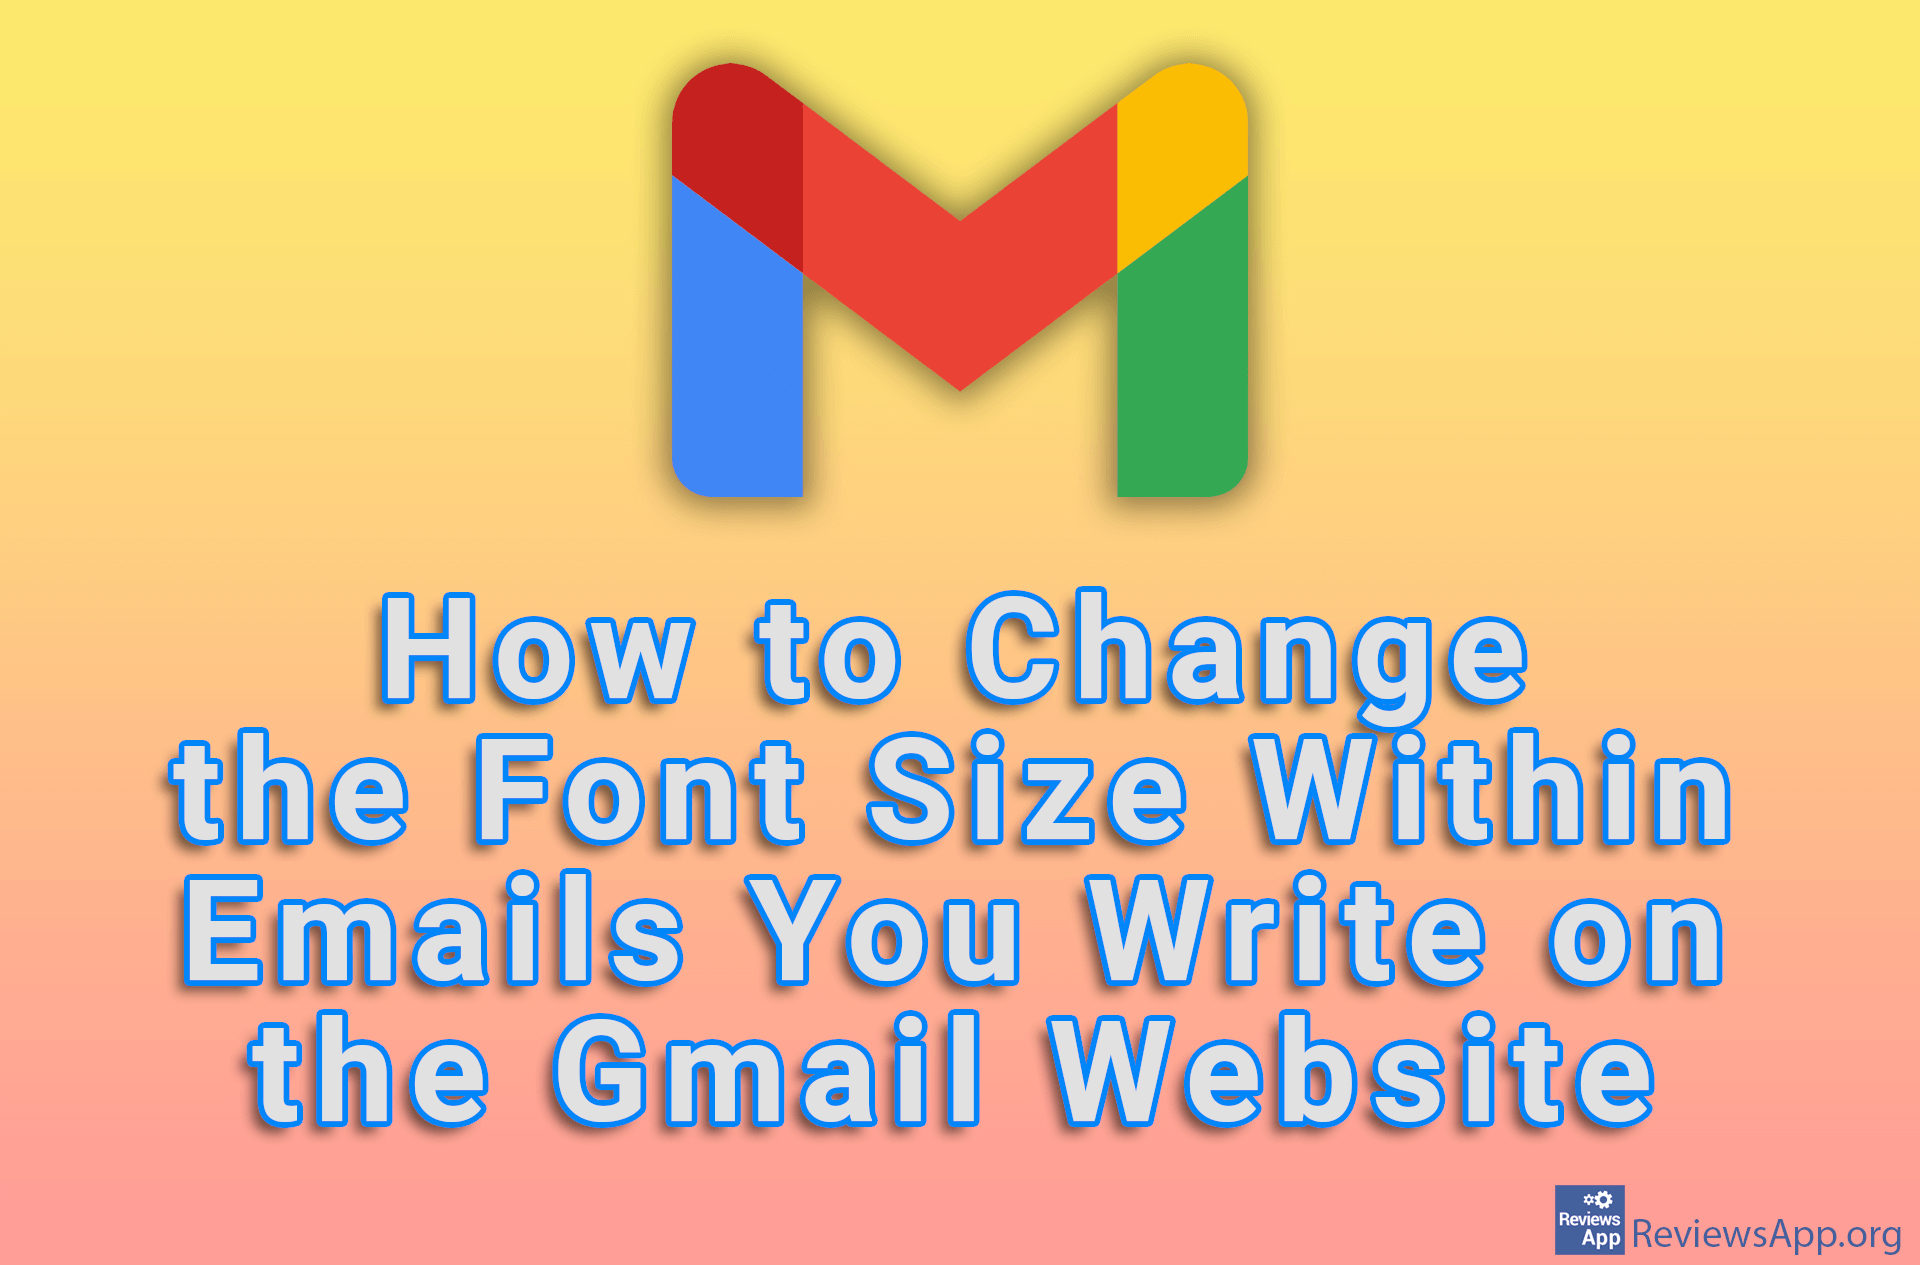 How to Change the Font Size Within Emails You Write on the Gmail Website